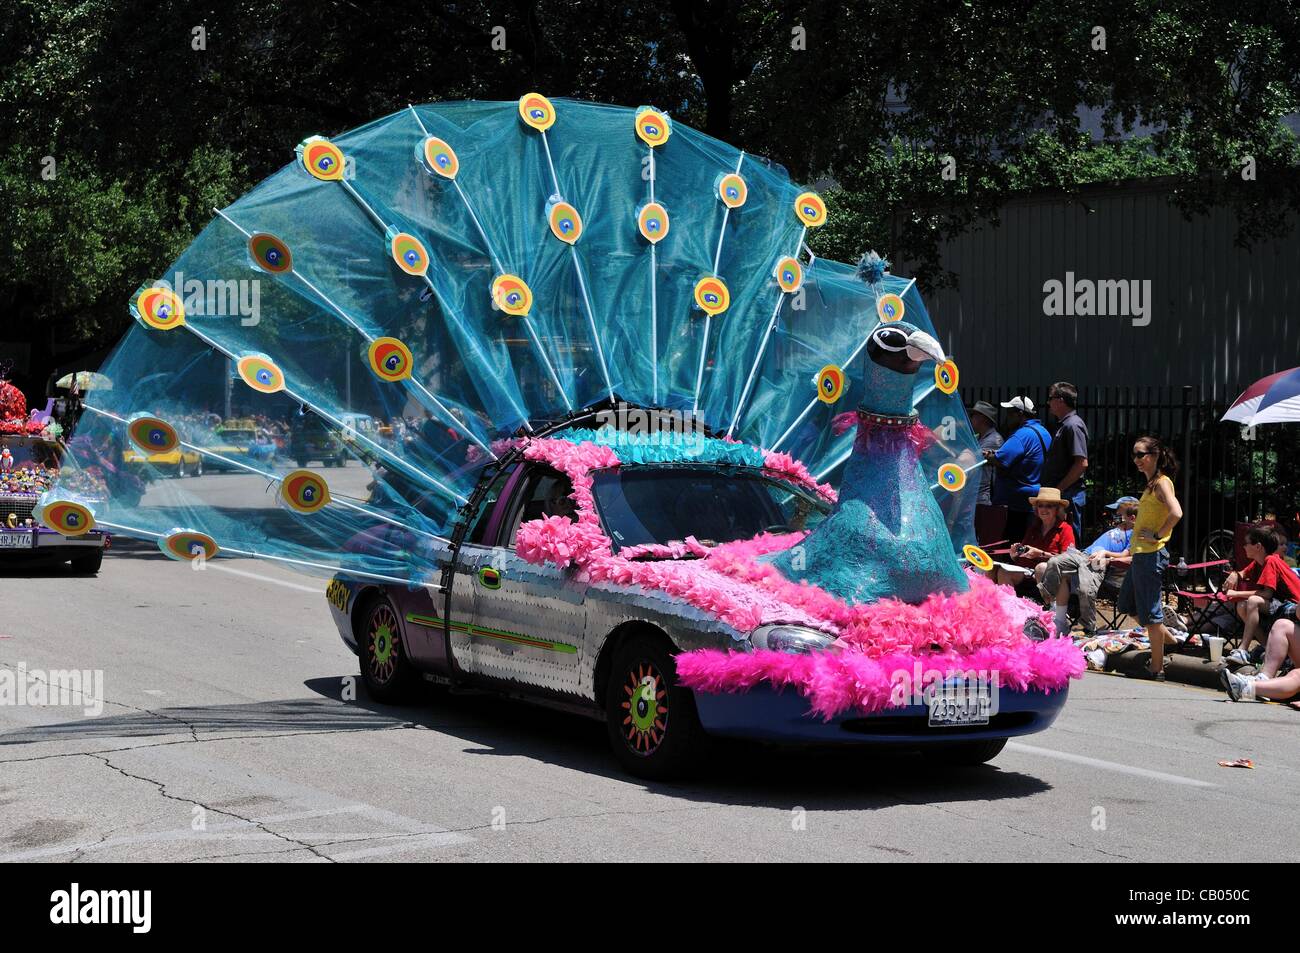 Annual Art Car Parade held in downtown Houston, Texas, USA